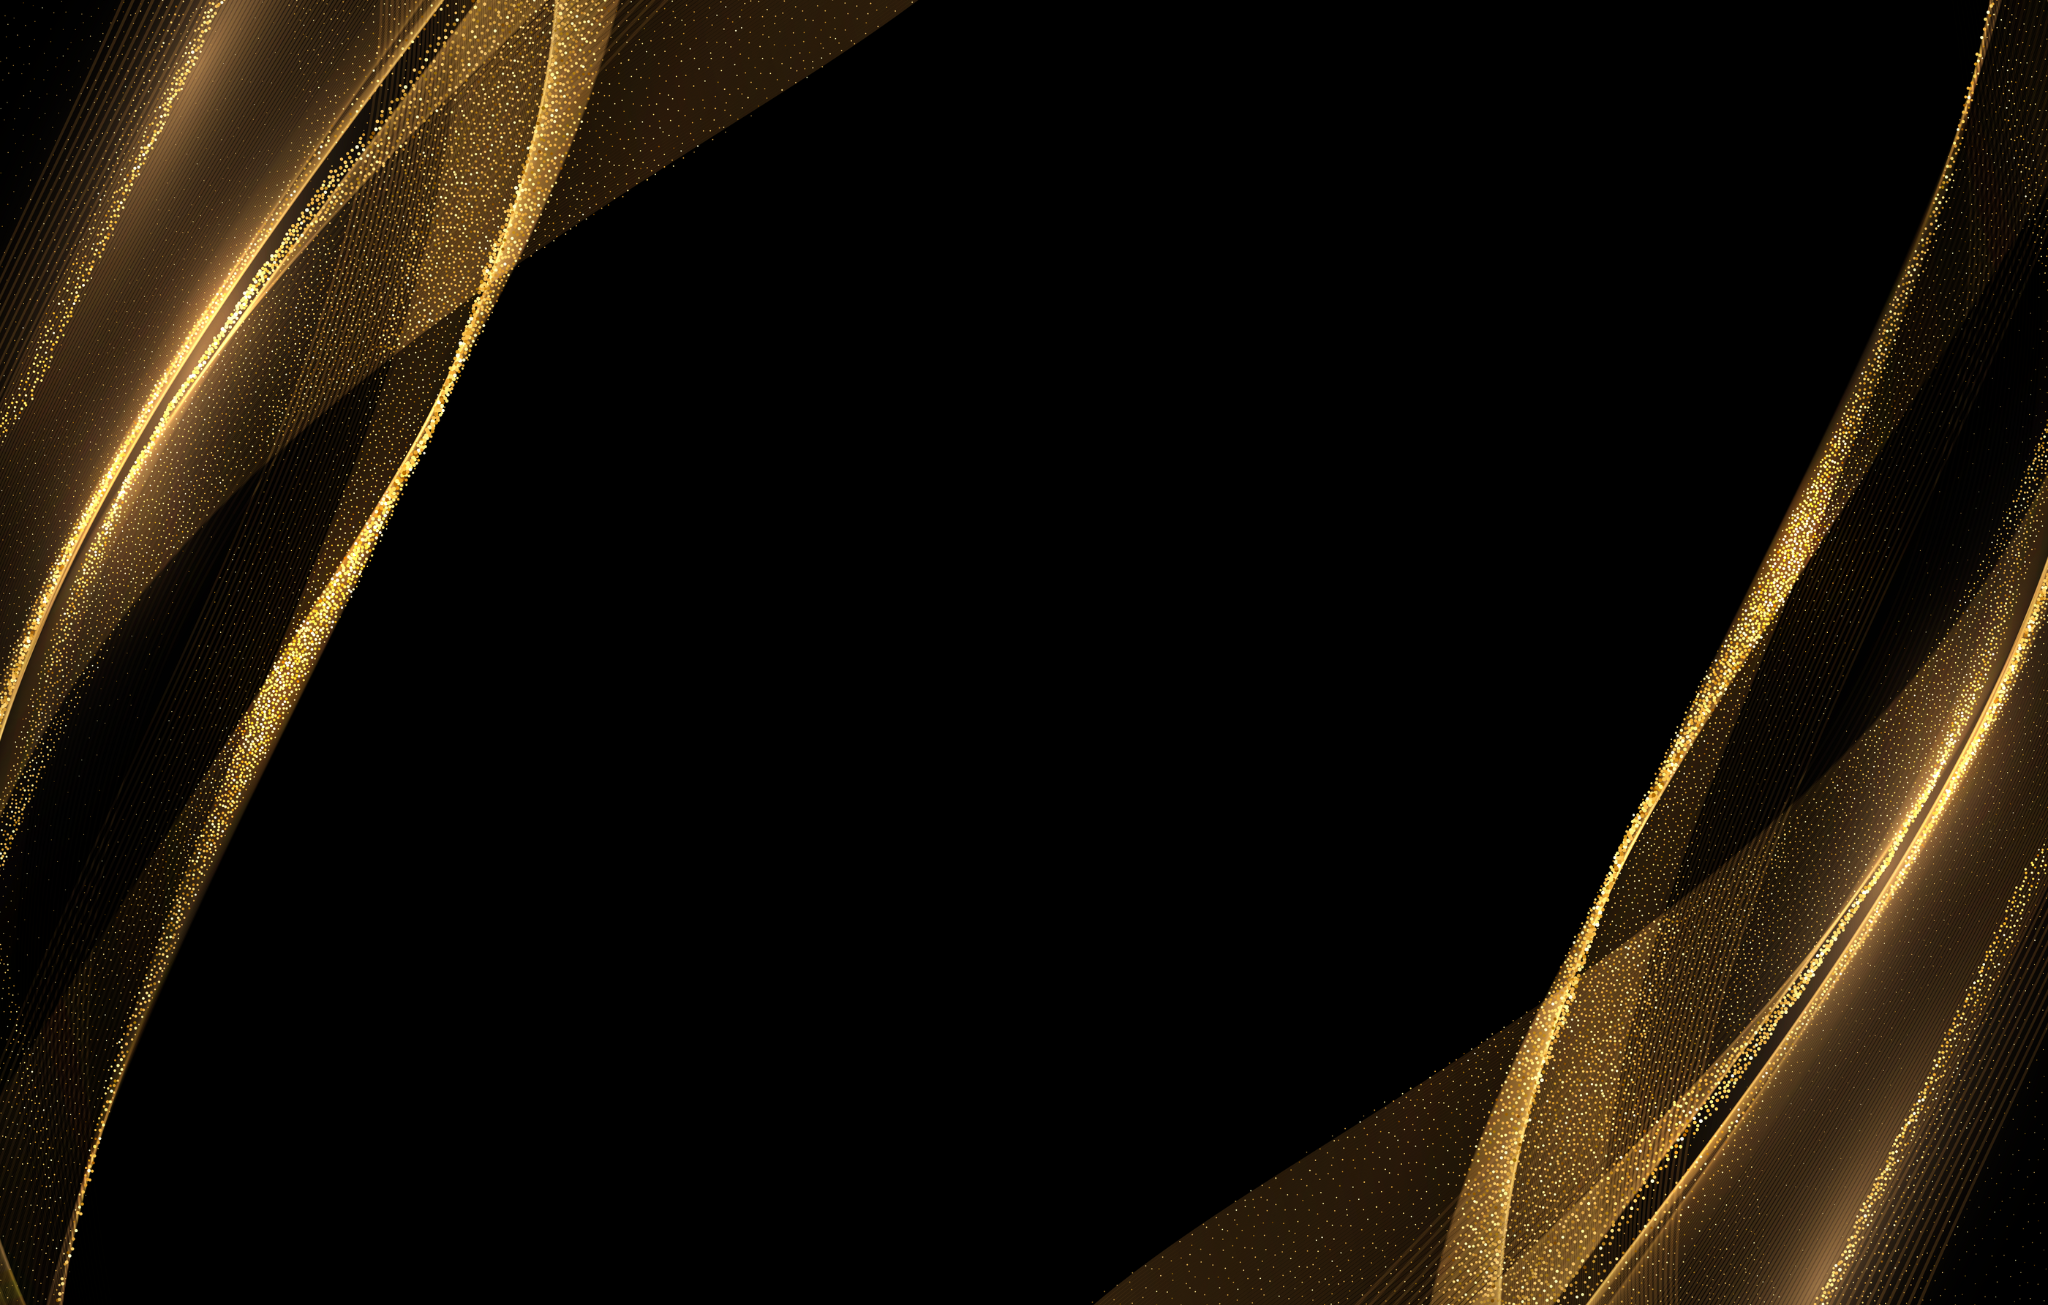 Gold and Black background